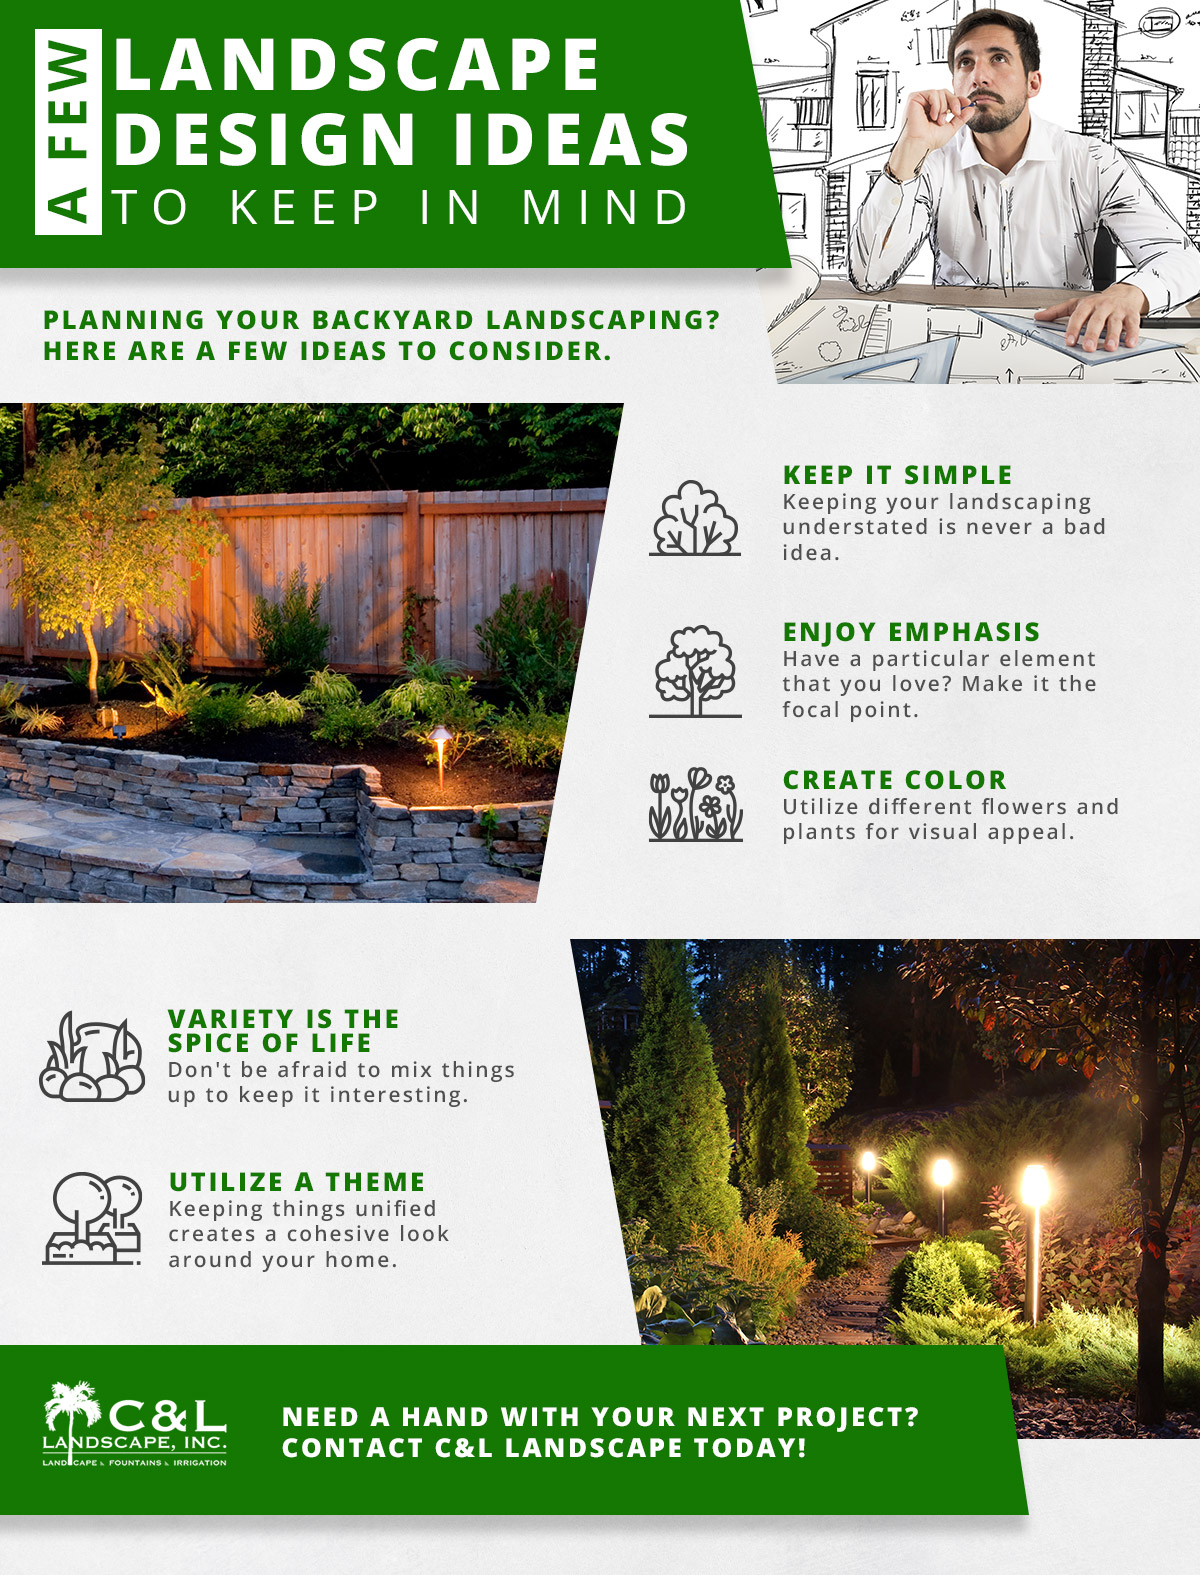 A-Few-Landscape-Design-Ideas-to-Keep-in-Mind-Infographic-5f7b3e877e53d